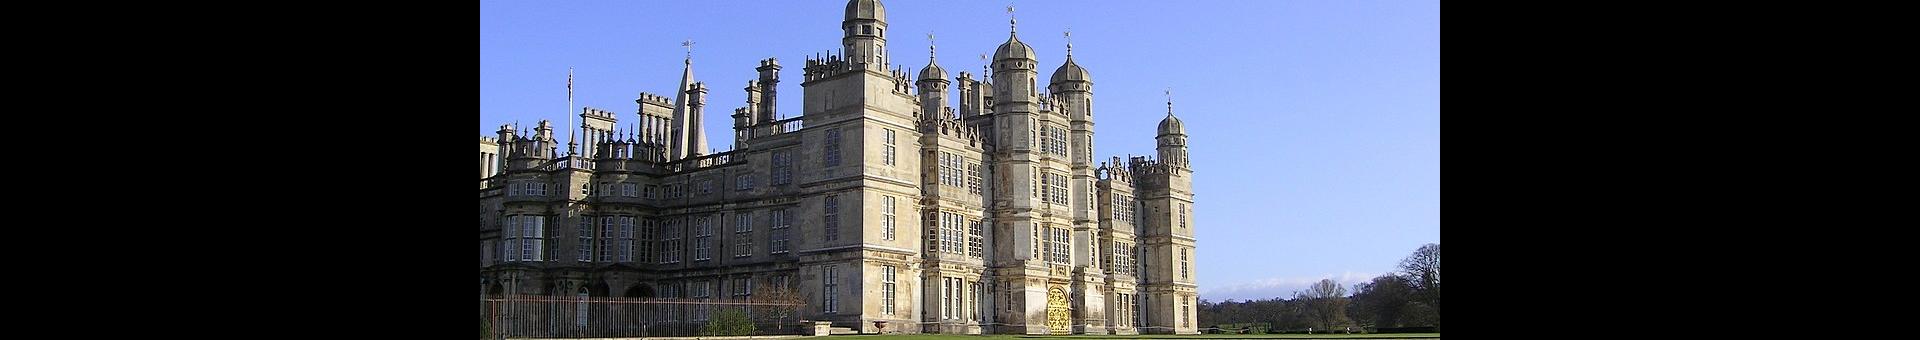 Burghley House By PJMarriott, CC BY 3.0, https://commons.wikimedia.org/w/index.php?curid=51289696